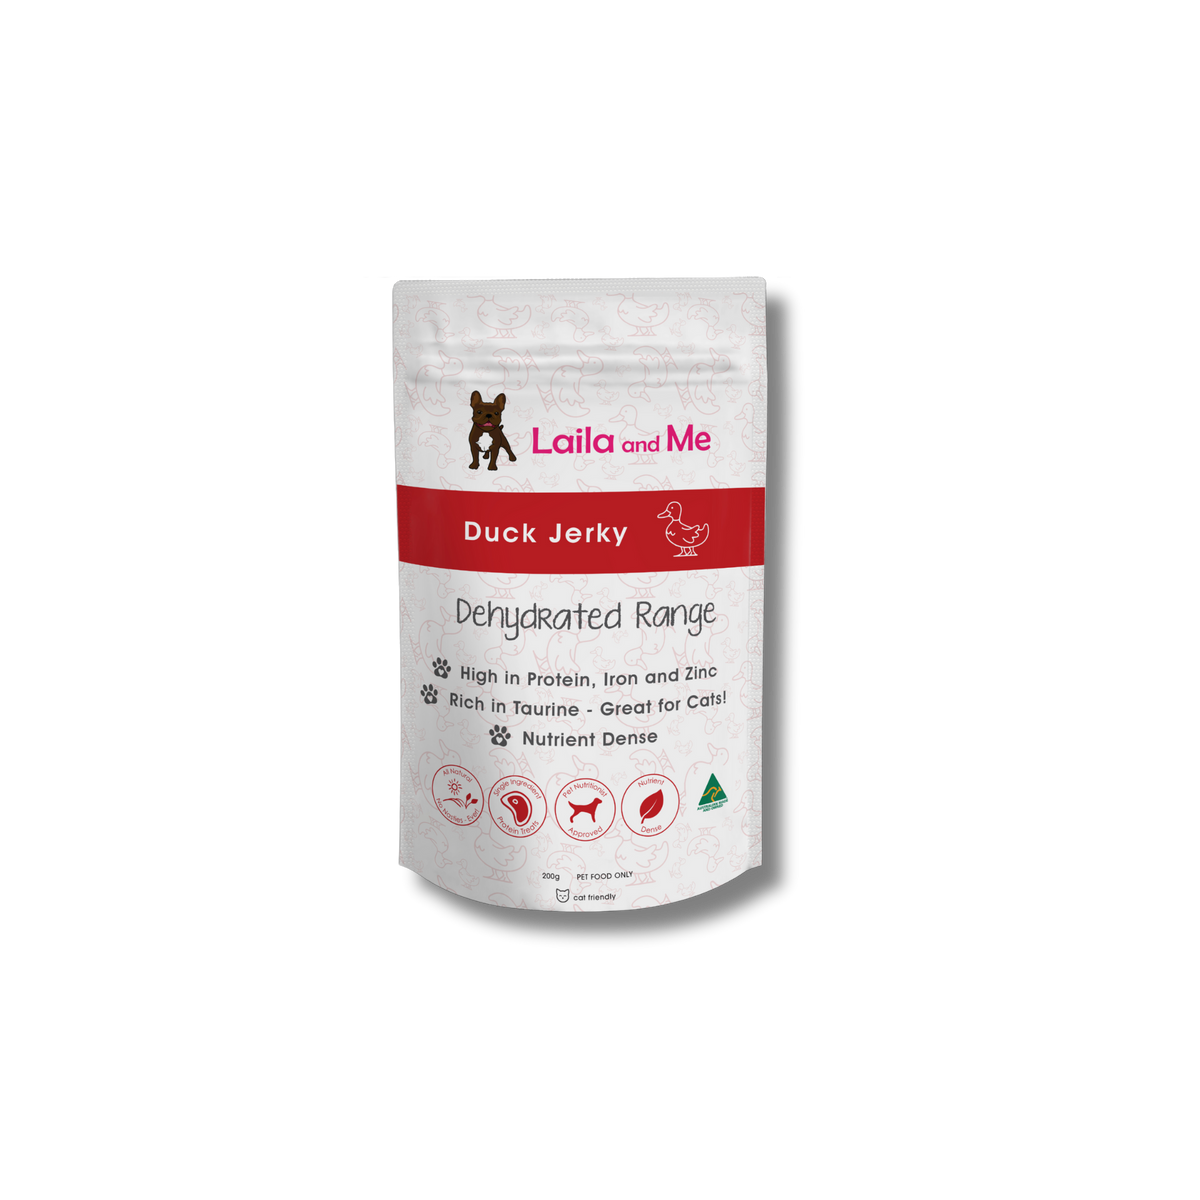 Duck Jerky for Dogs - Laila and Me. Dog Treats in Australia are created by Laila and Me and this product is Duck Jerky, a high protein and high iron and zinc dog treat. 